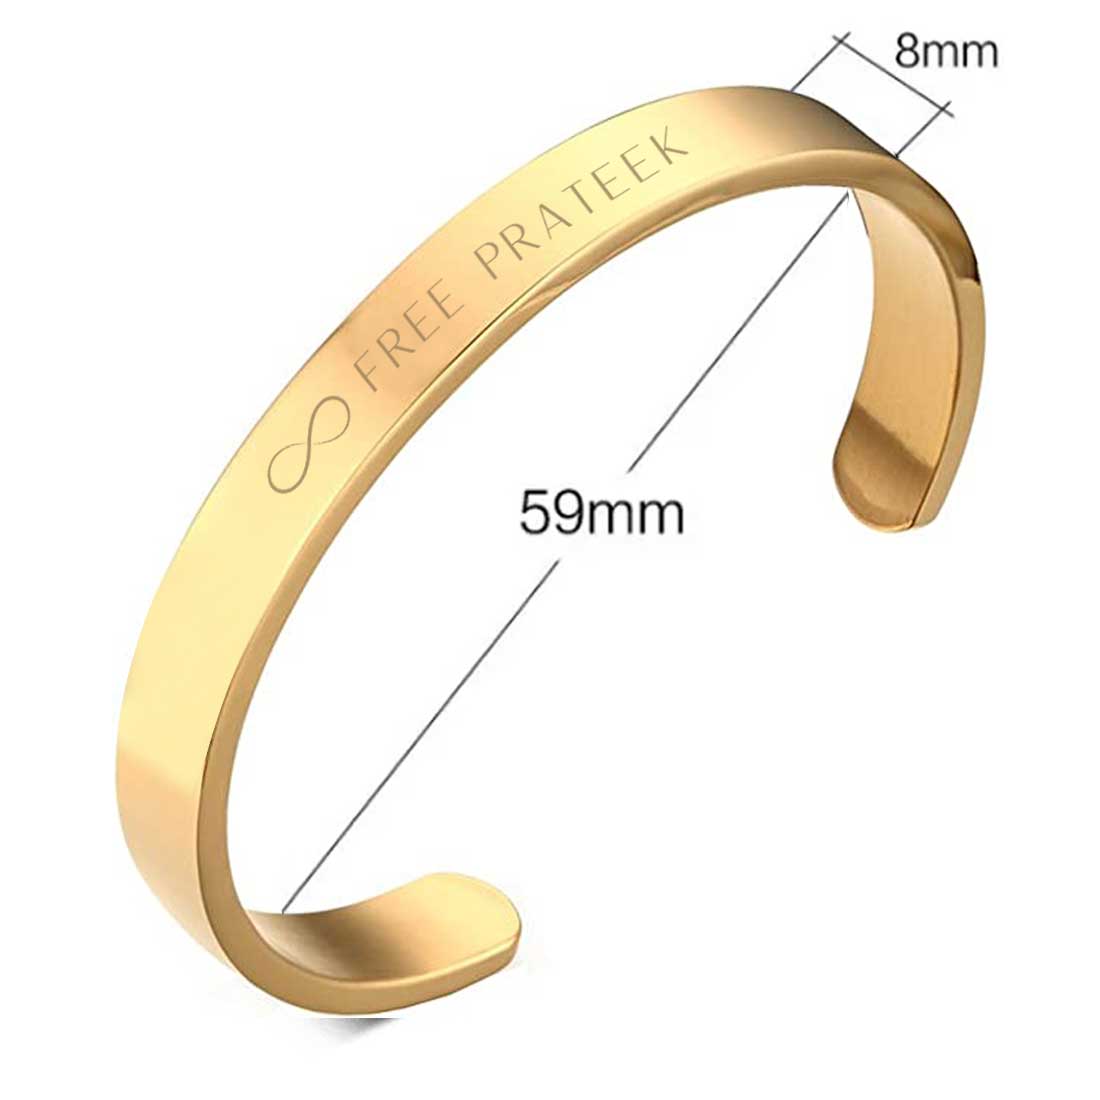 Engraved Personalised Bracelets Kada With Name for Men Women  - Rose Gold Plated/Black Rhodium/Gold Plated - Infinity